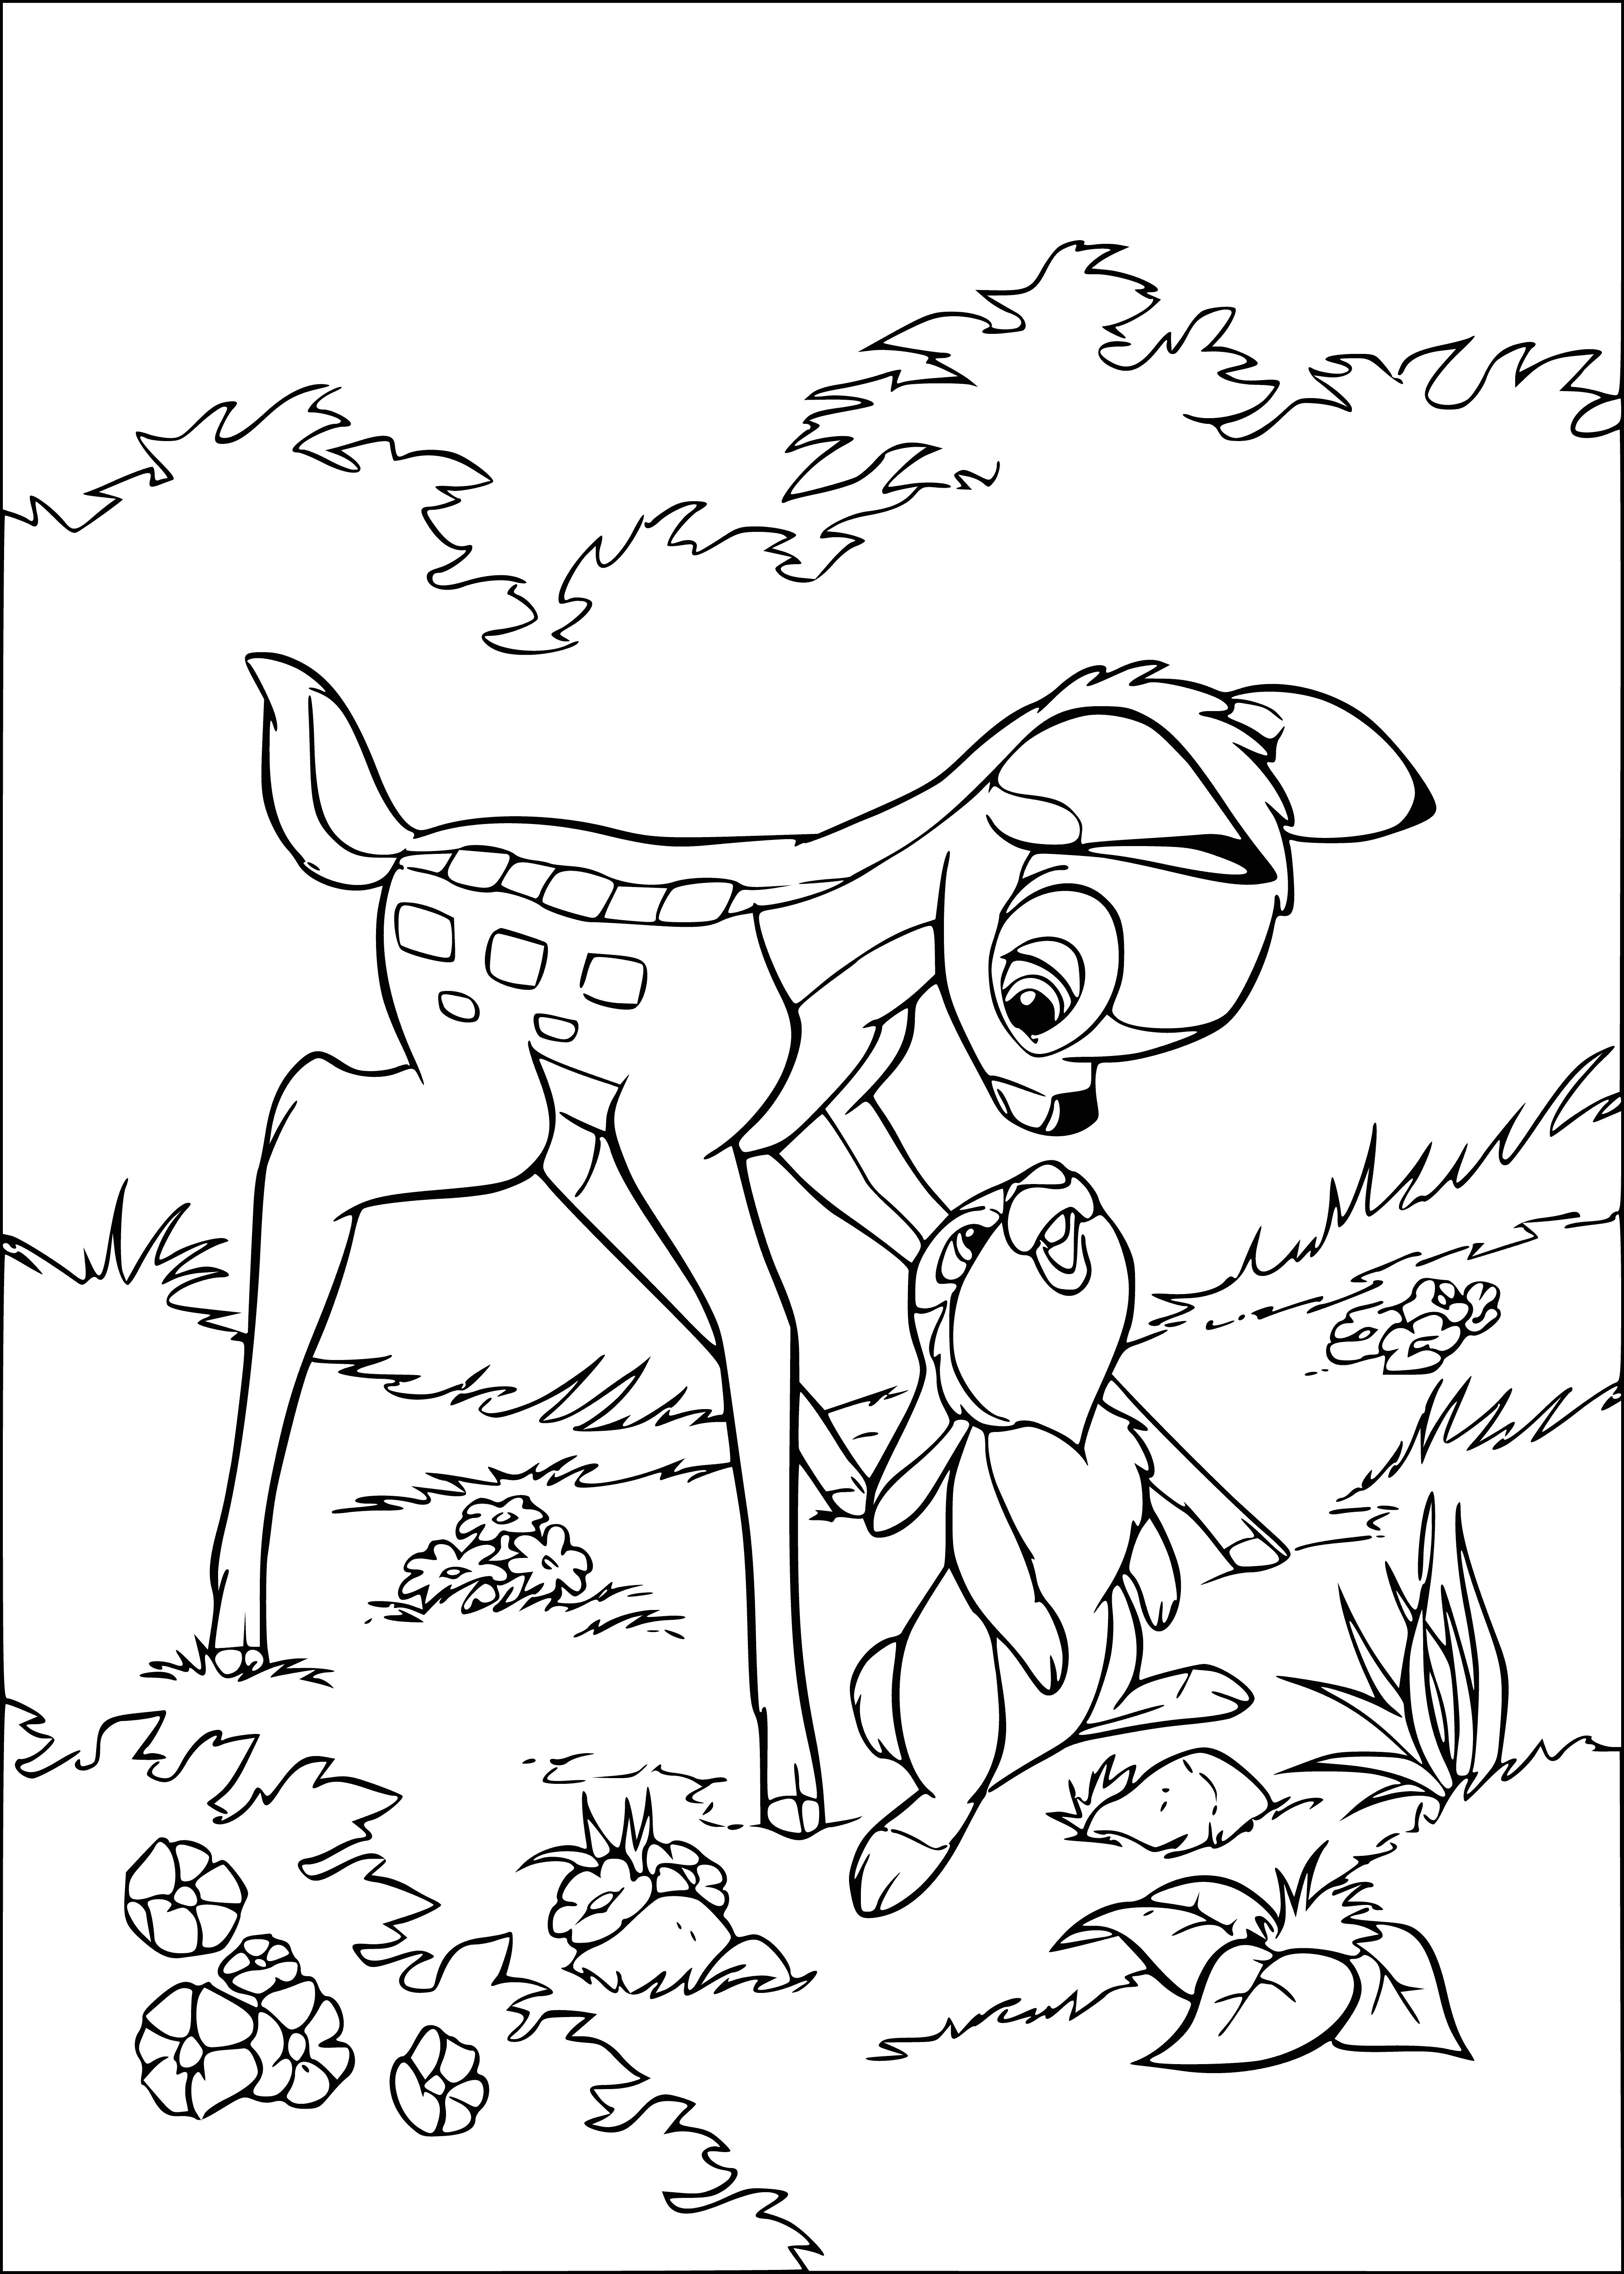 Friends coloring page